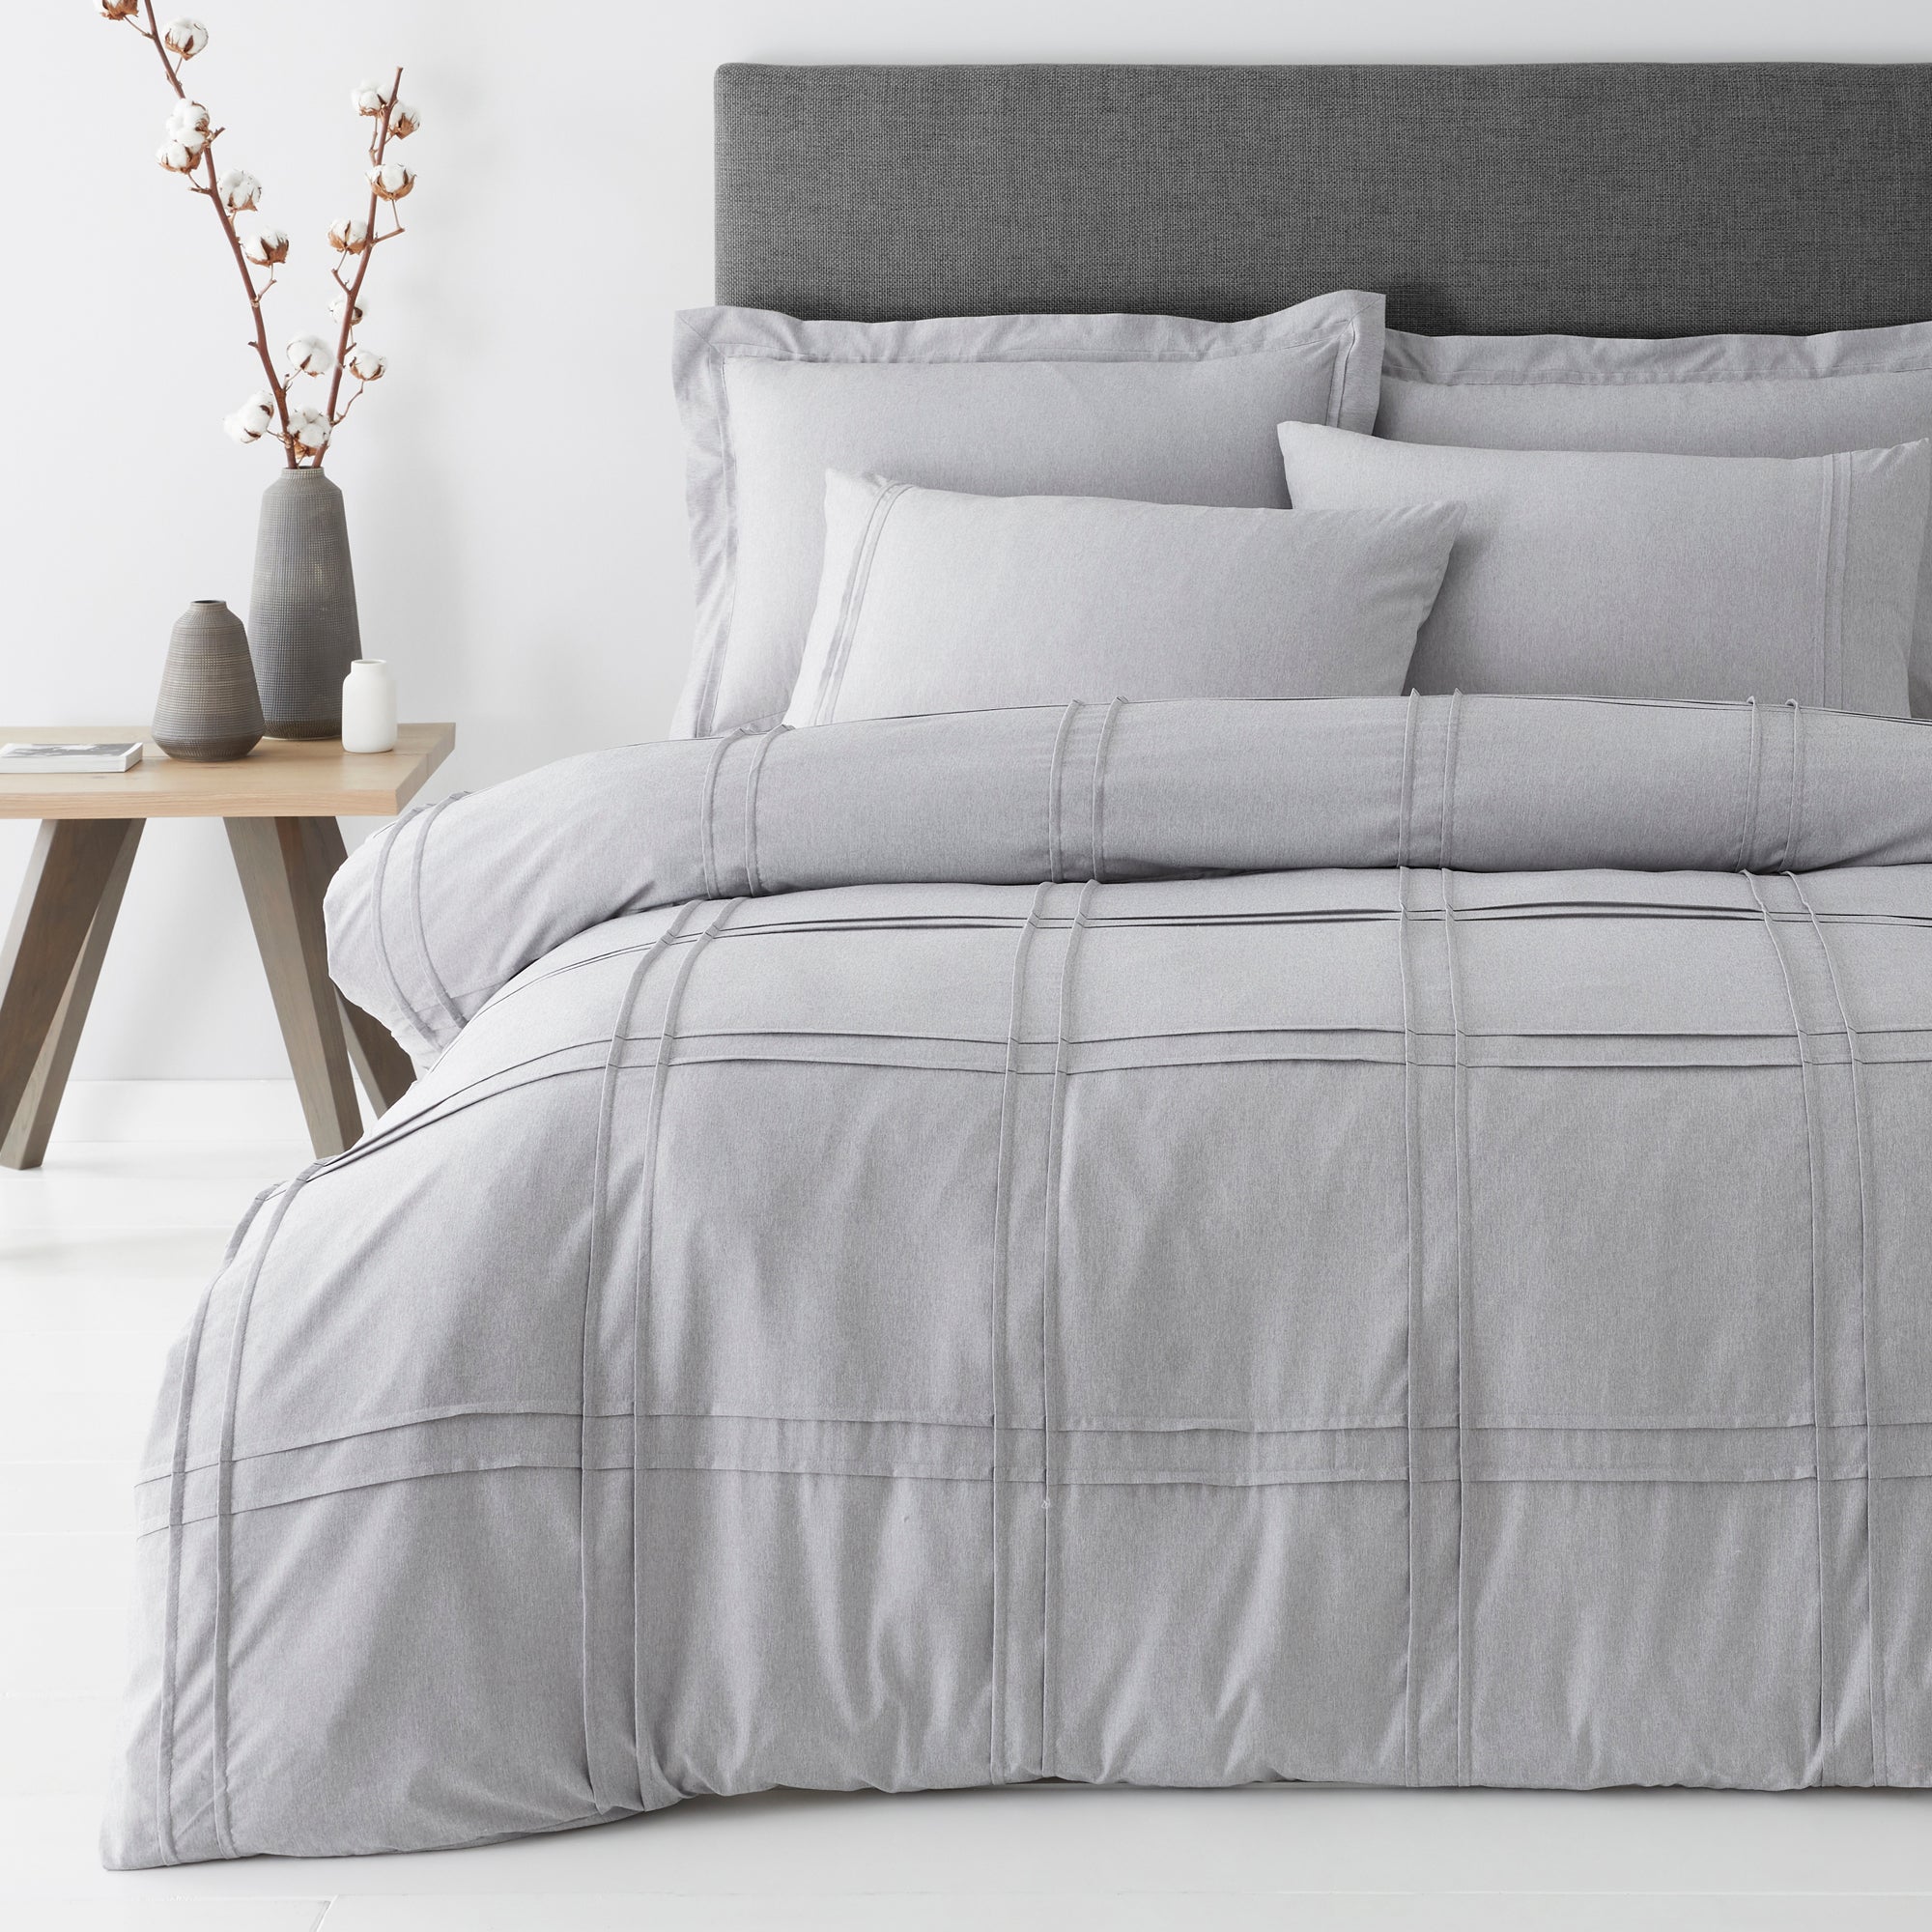 Duvet Covers & Sets - Bedding Collections | Dunelm | Page 6